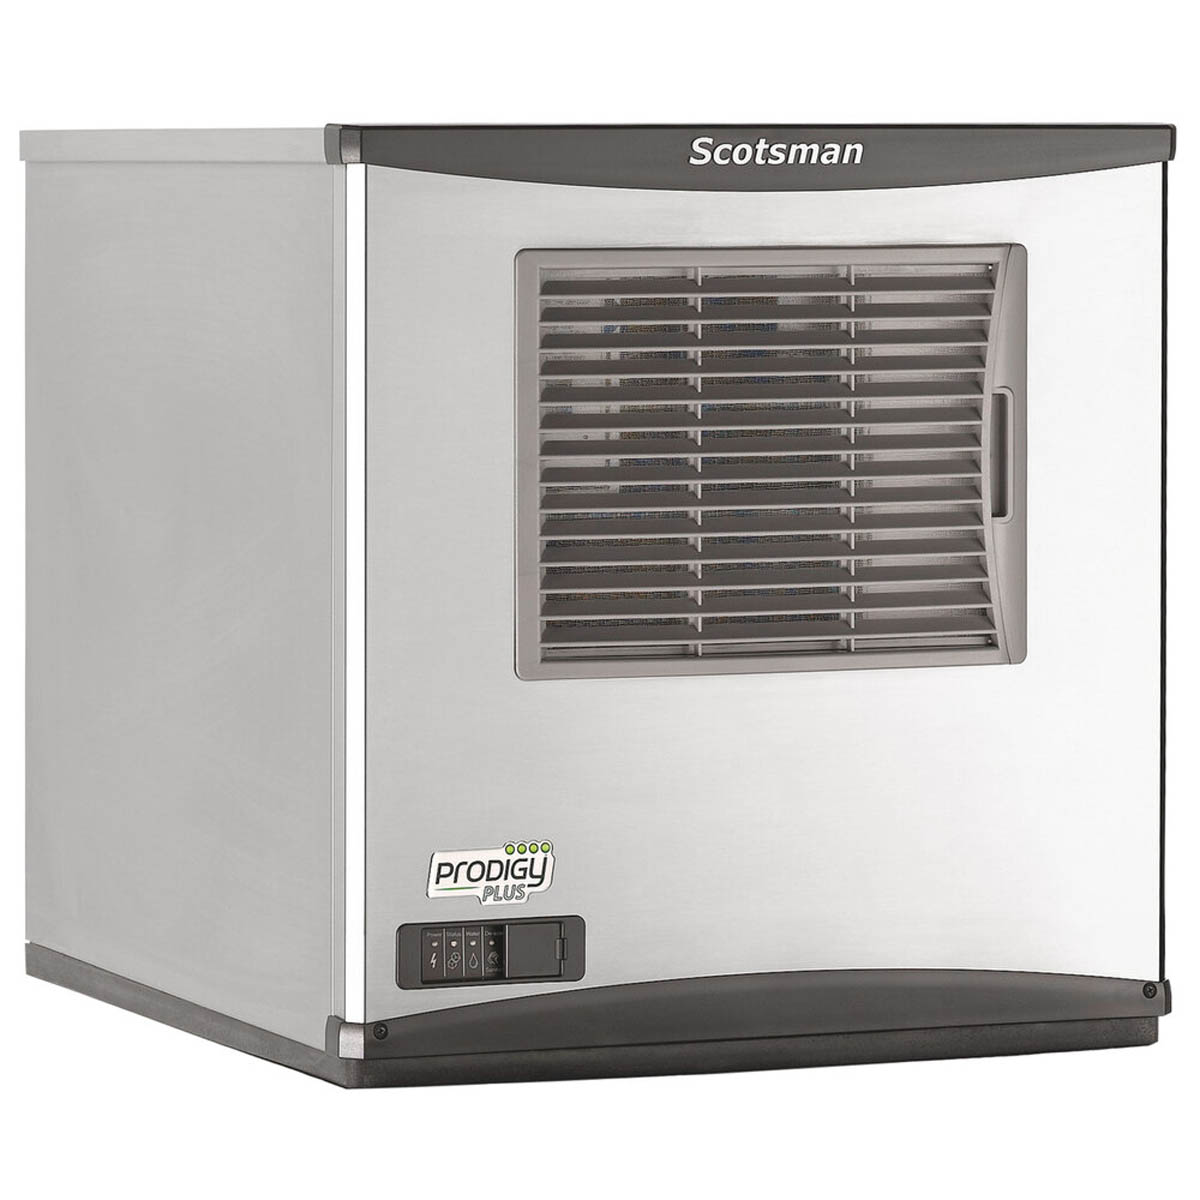 Scotsman NH0422A-1 22“ Air-Cooled Nugget-Style Ice Maker, 456 lbs/Day